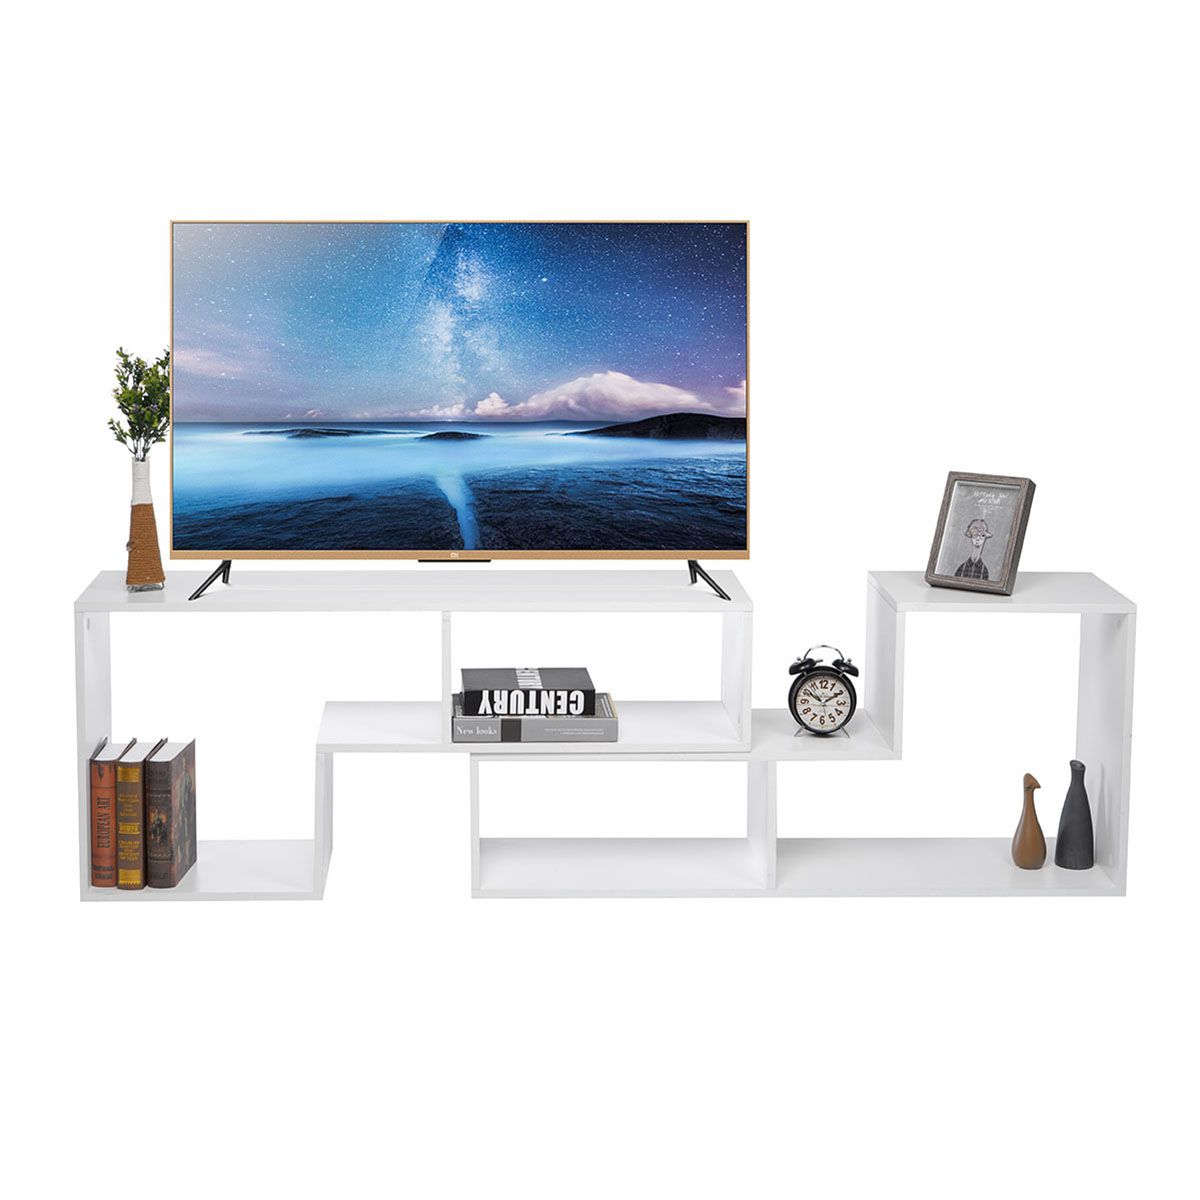 43'' 86'' Tv Shelf Tv Stand Media Console Shelf Bookcase Intended For Single Shelf Tv Stands (View 14 of 15)